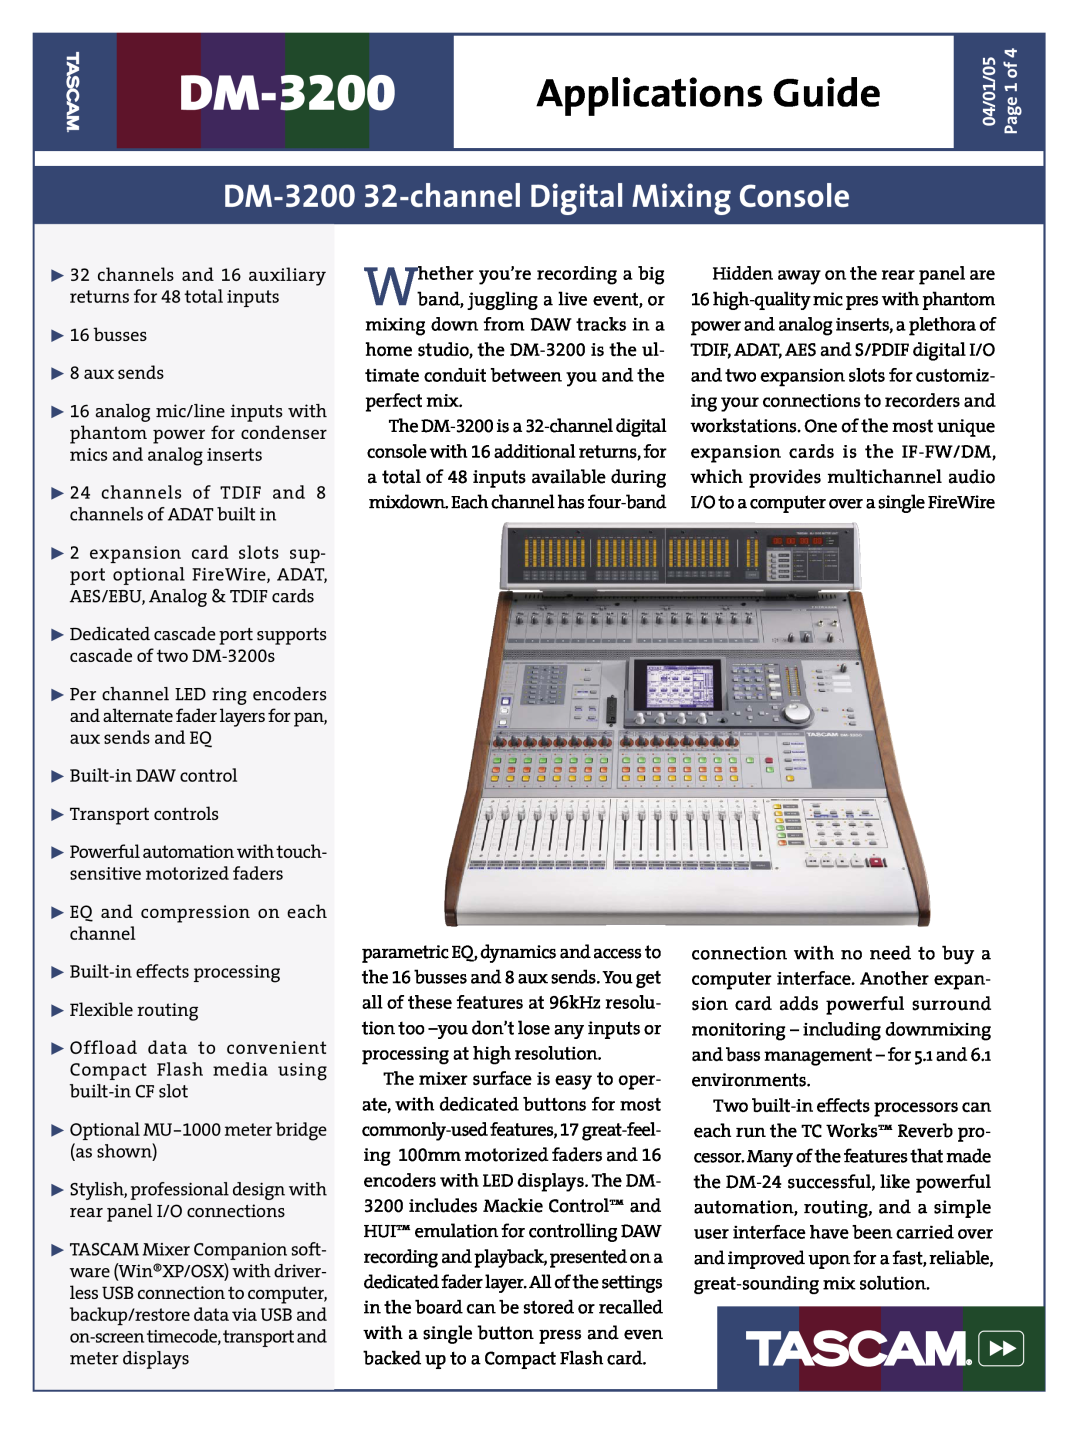 Tascam DM-3200 owner manual Digital Mixing Console, Owner’S Manual, D001865710A 